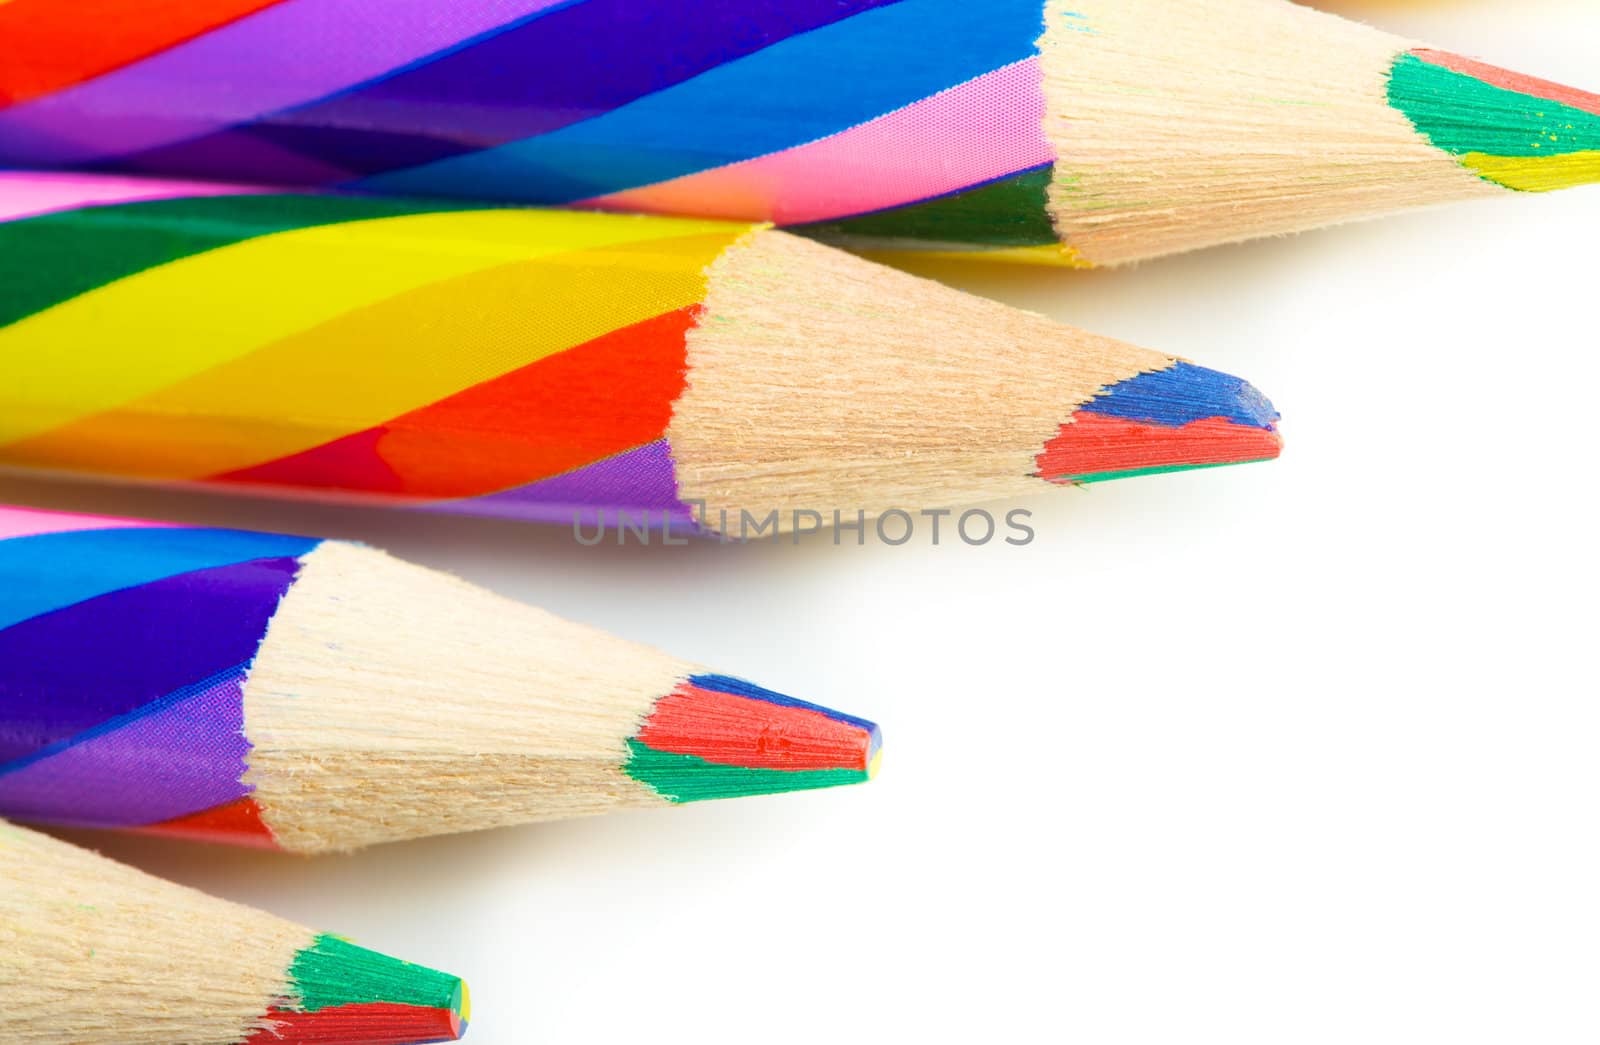 striped colorful pencils isolated on white background